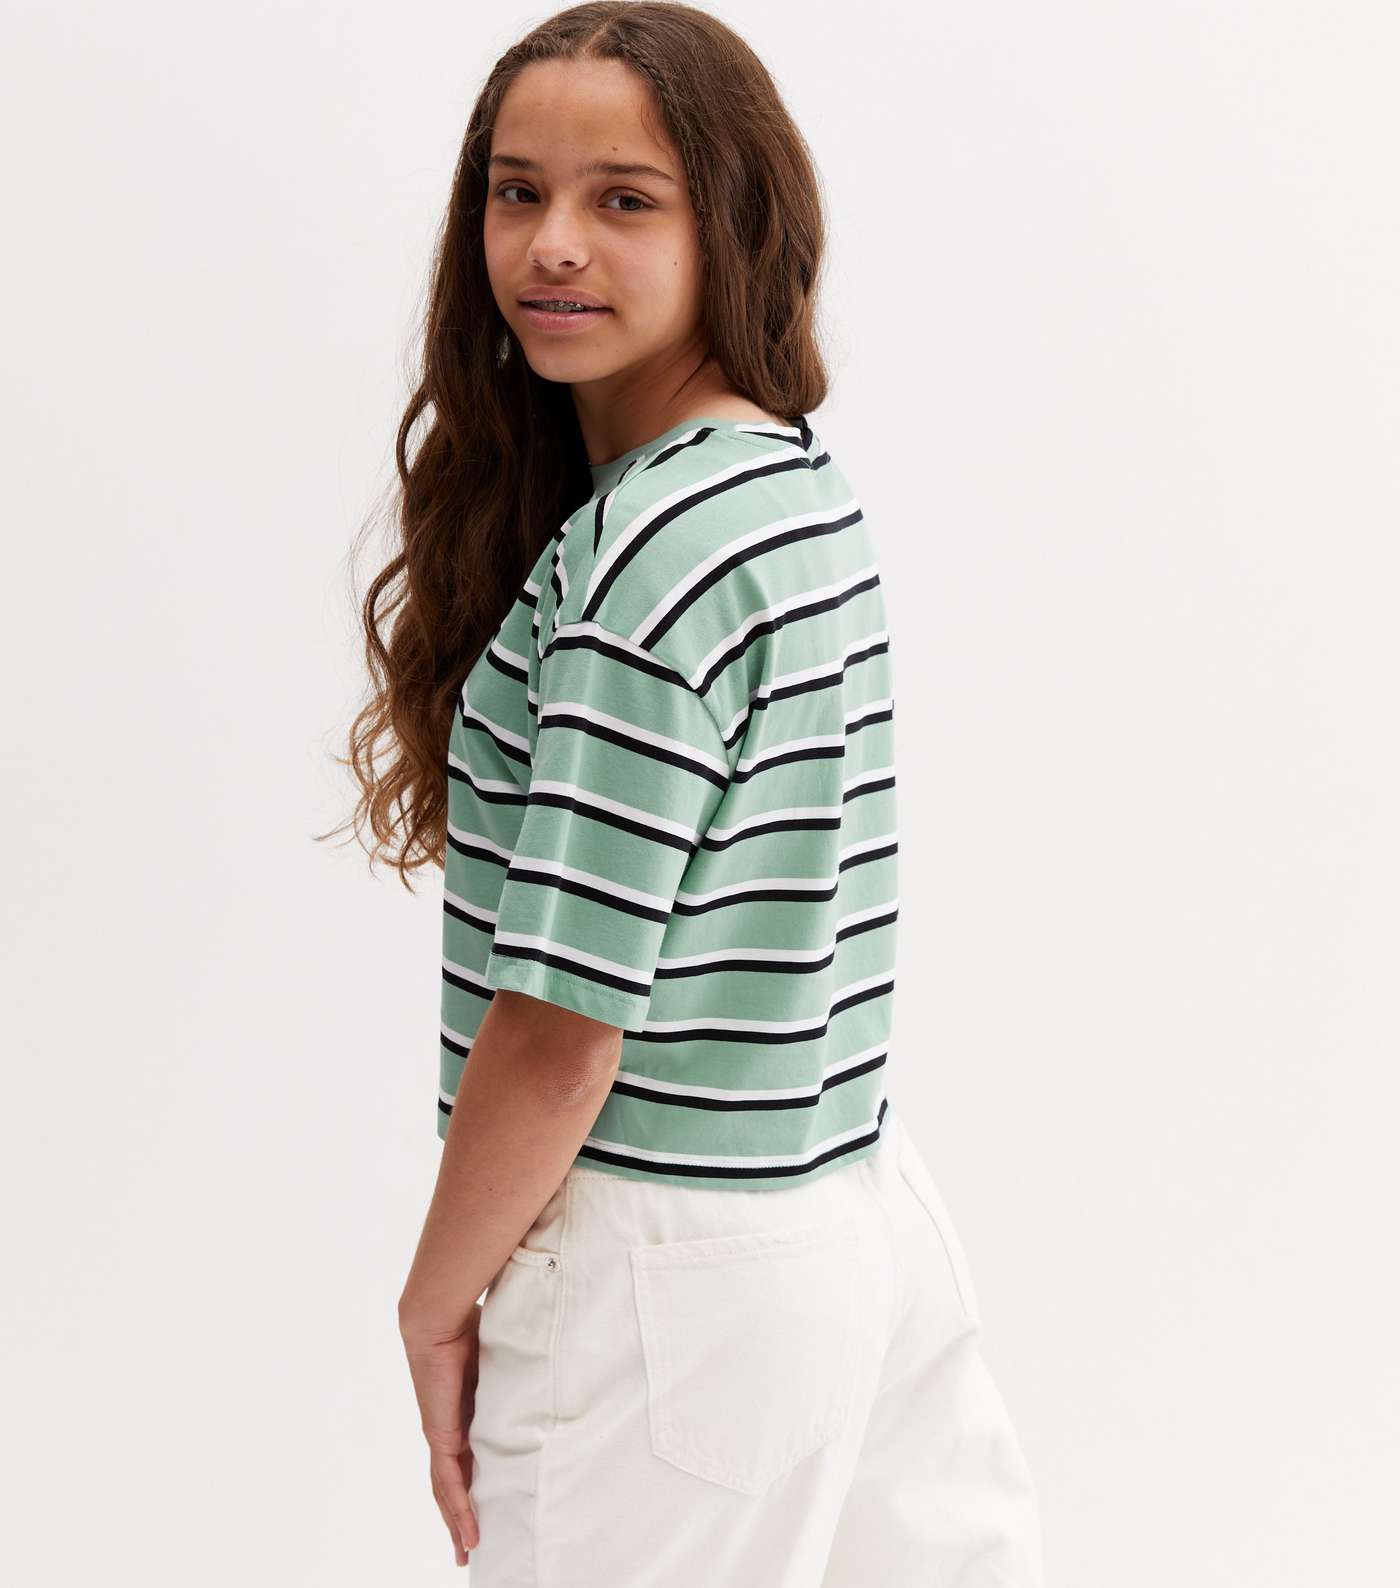 Girls 3 Pack Green Stripe White and Camel T-Shirts Image 4